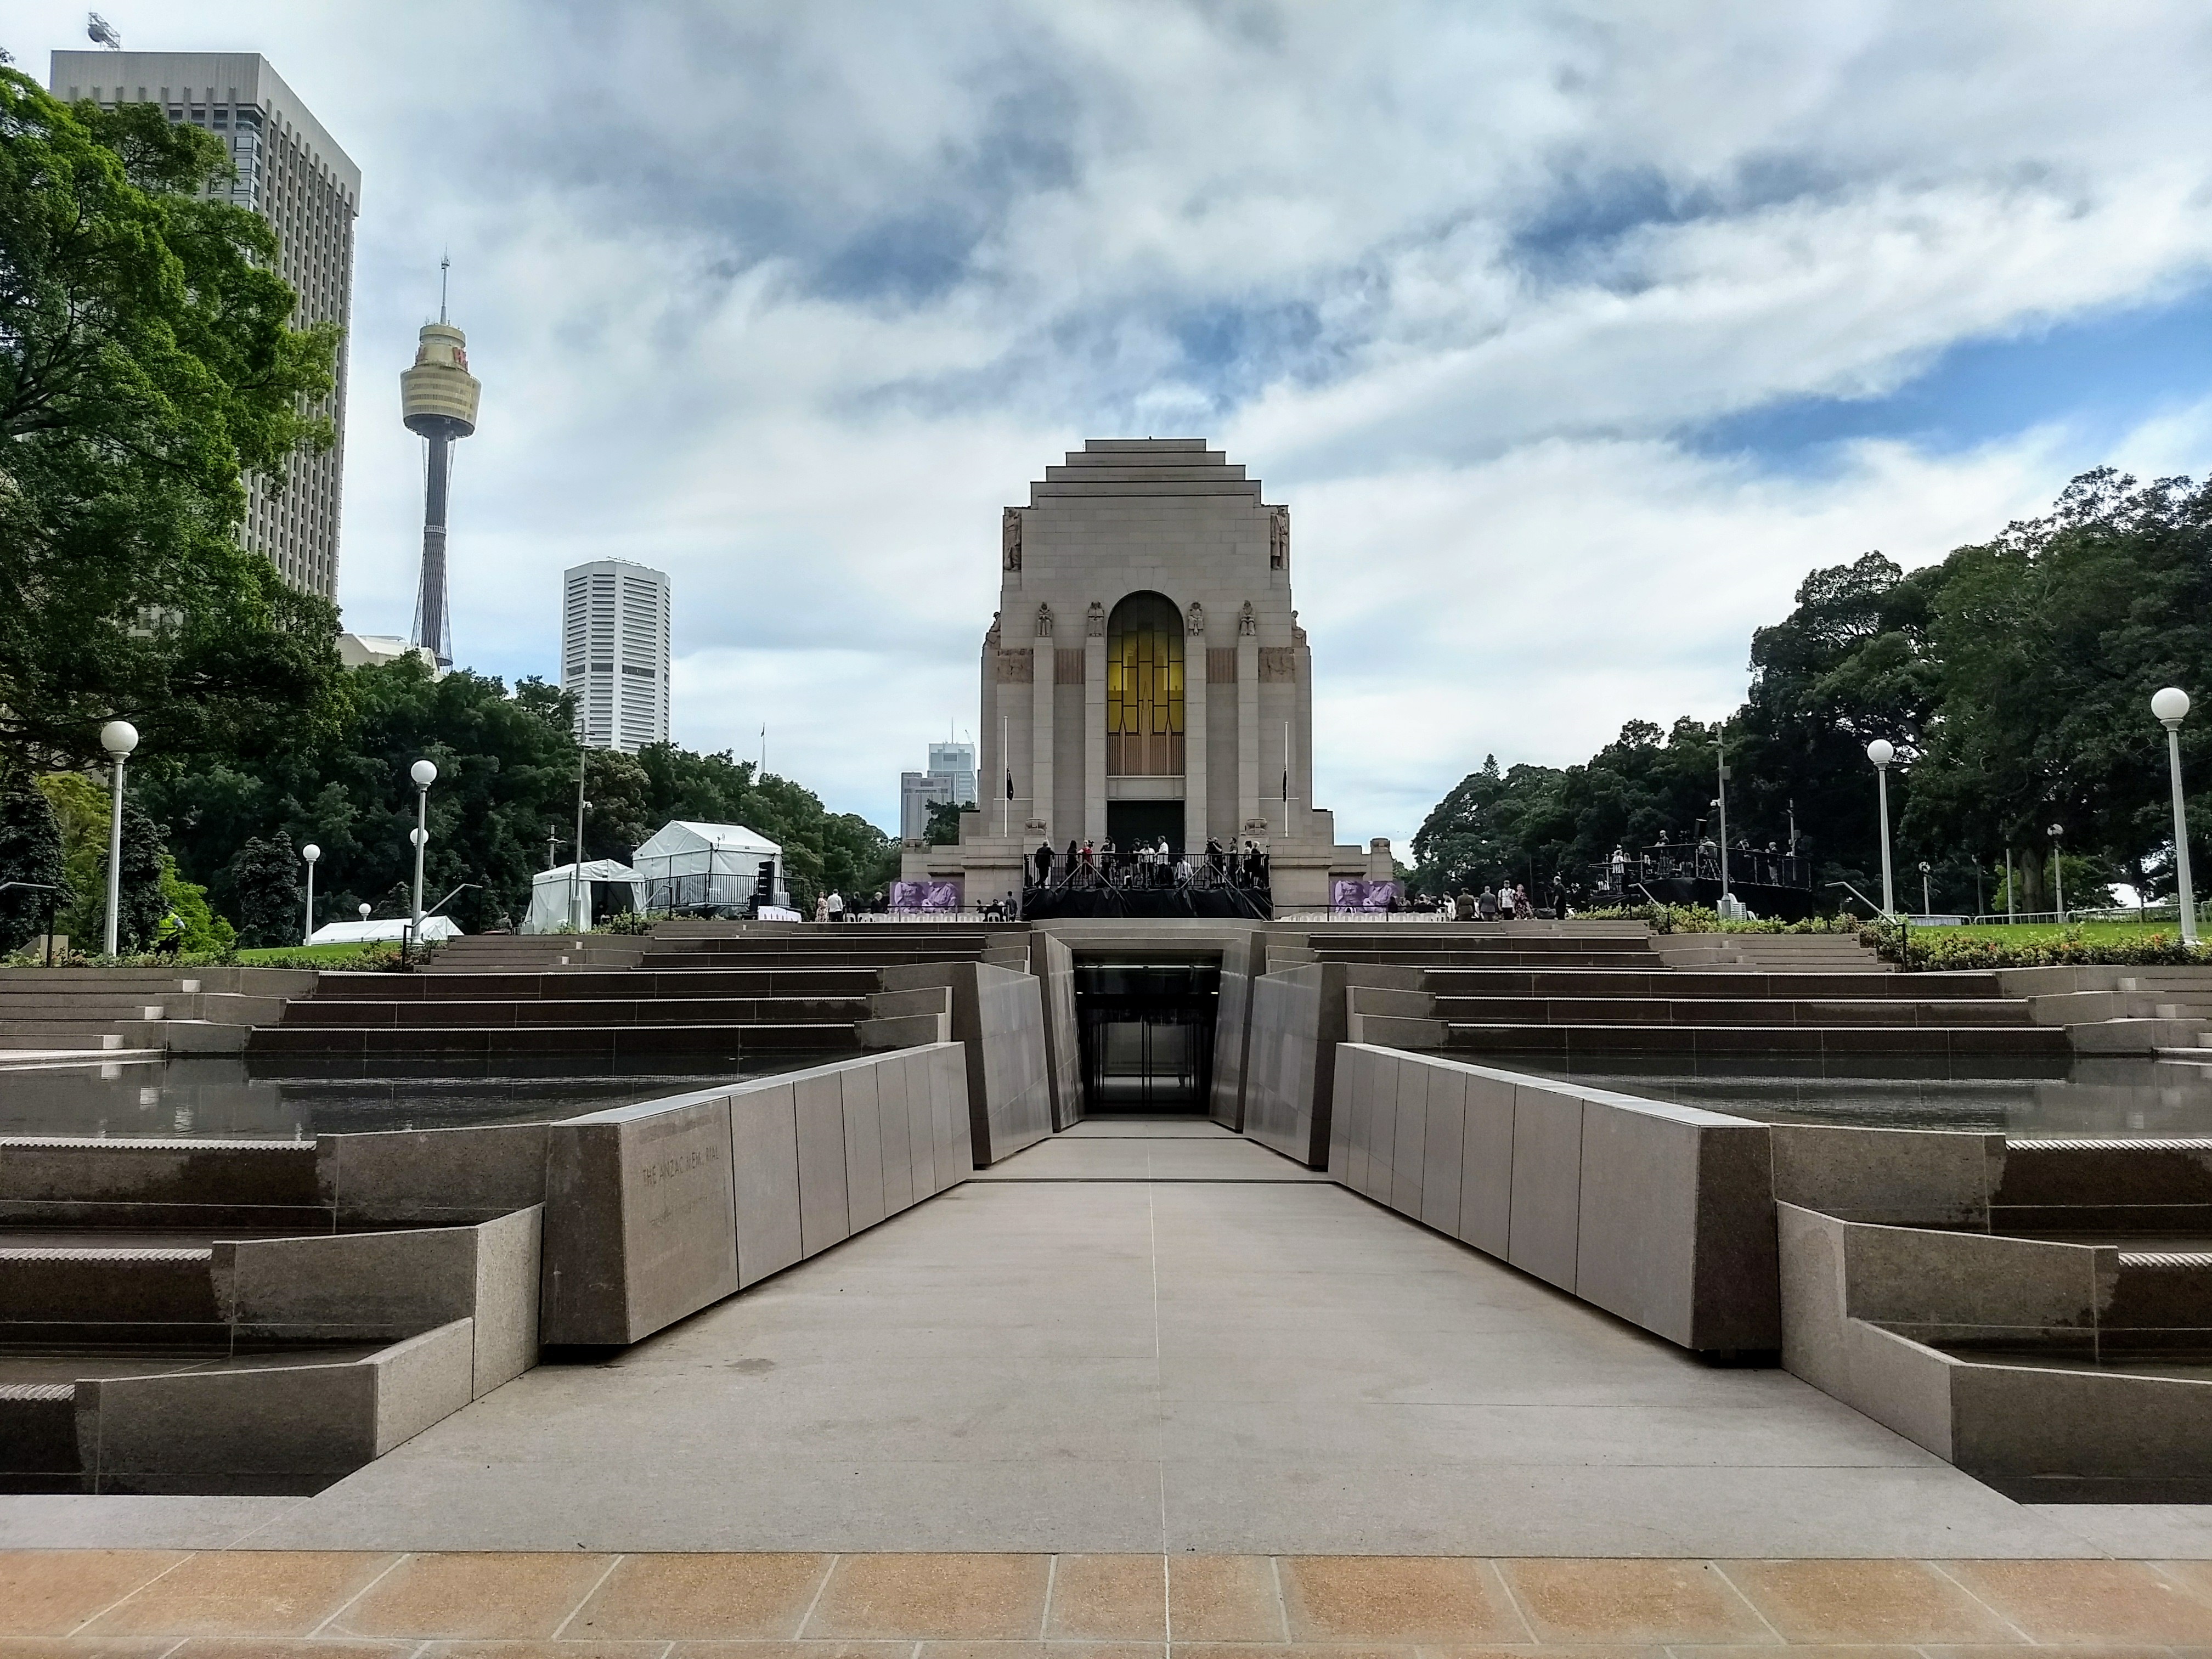 Harry and Meghan will officially open Sydney's Anzac Memorial